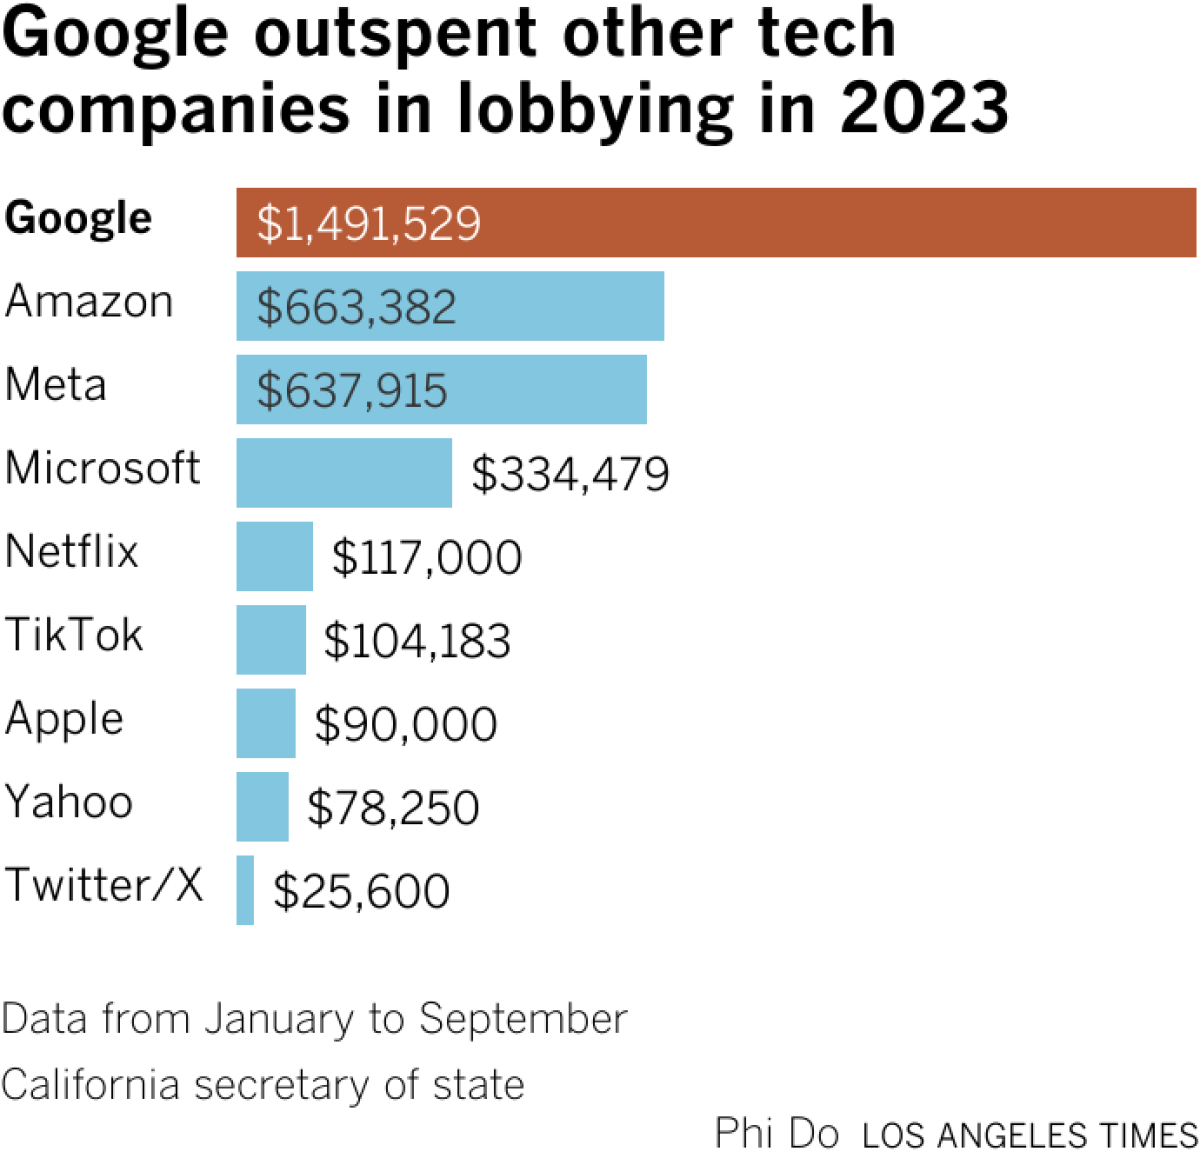 Bar chart showing how Google's lobbying outspent other tech companies